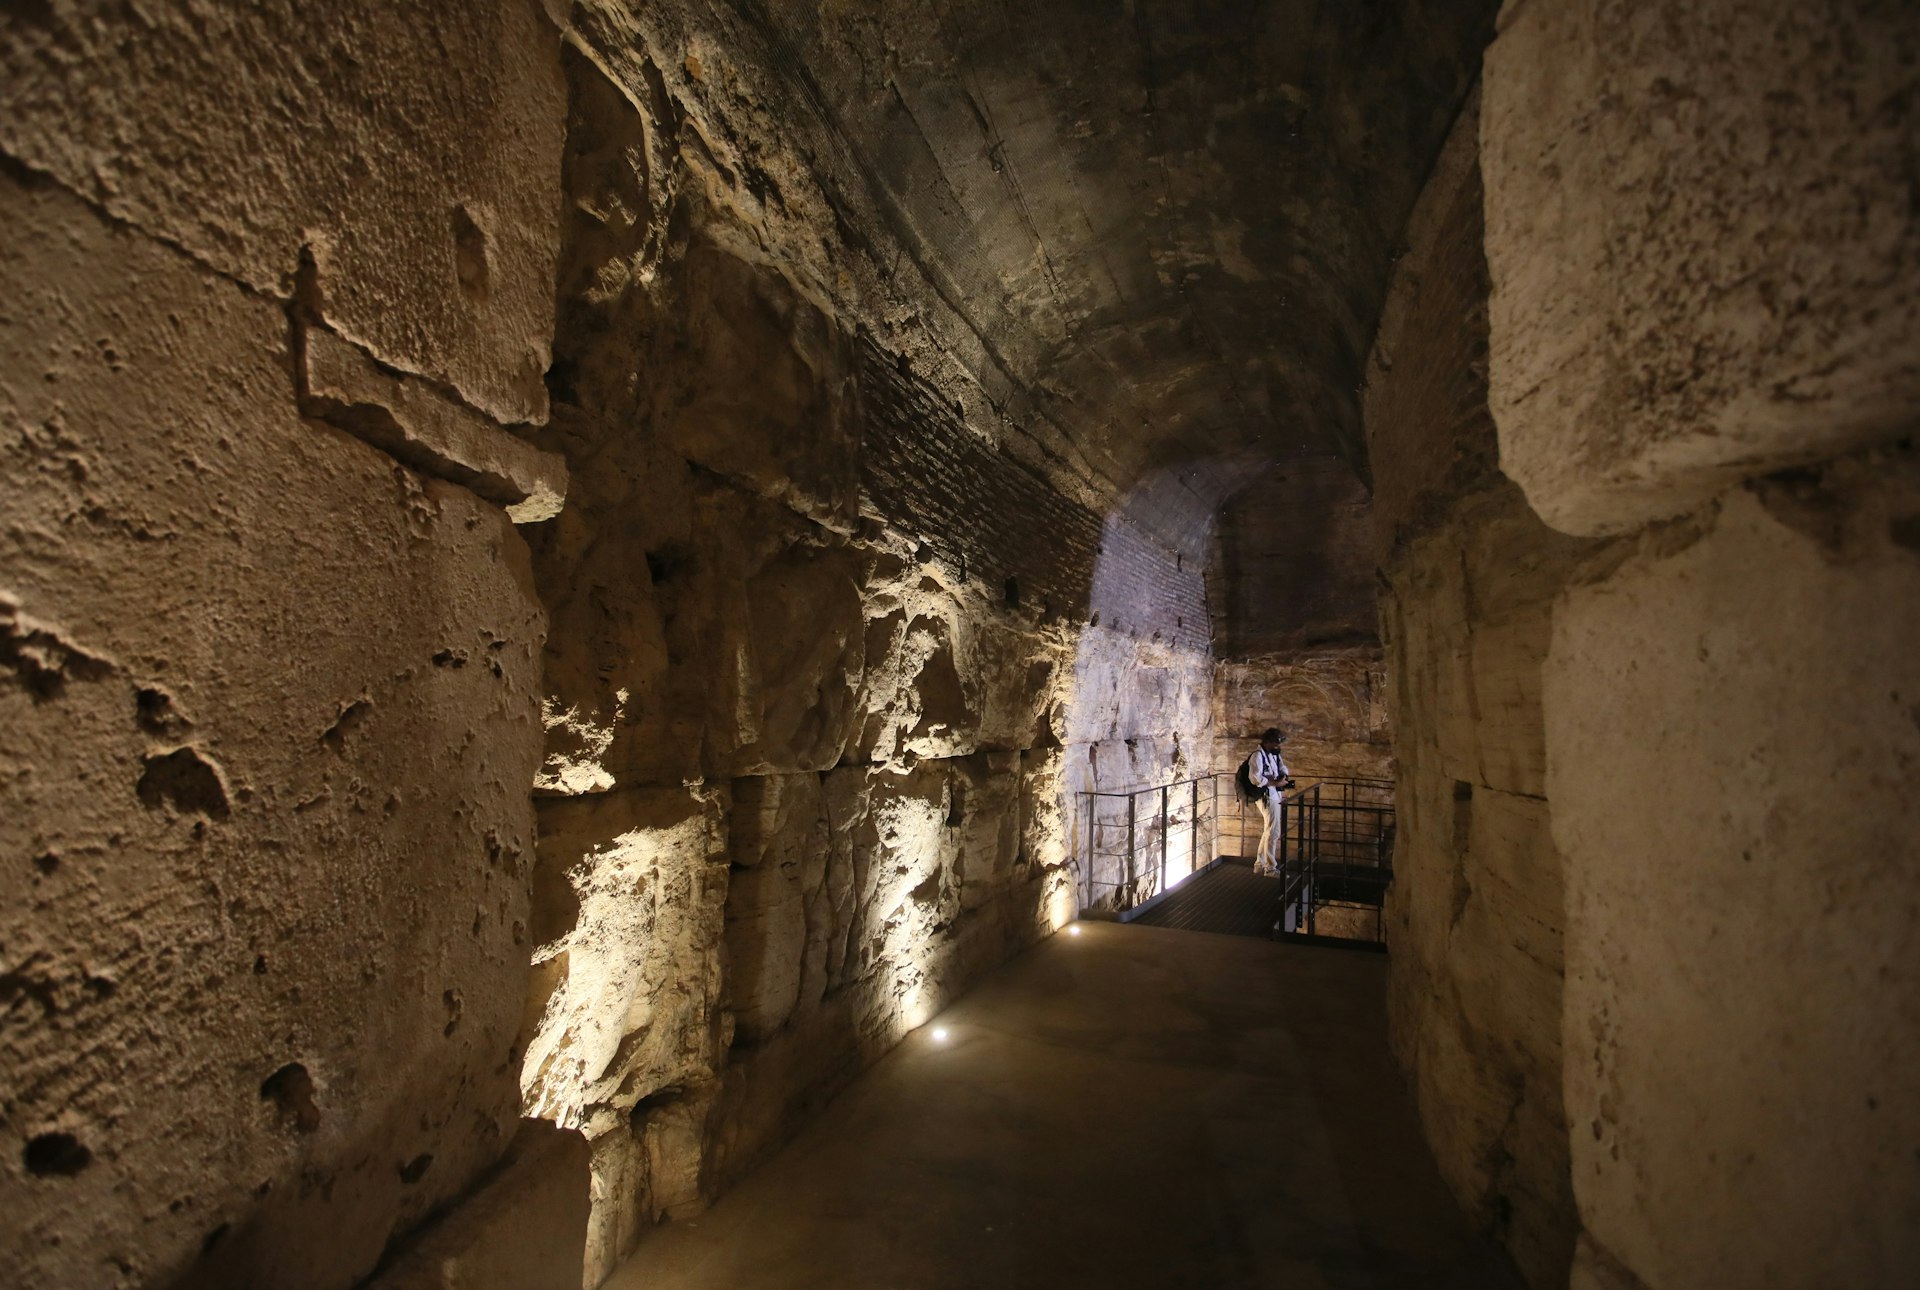 Works on the underground area of the Flavian Amphitheater